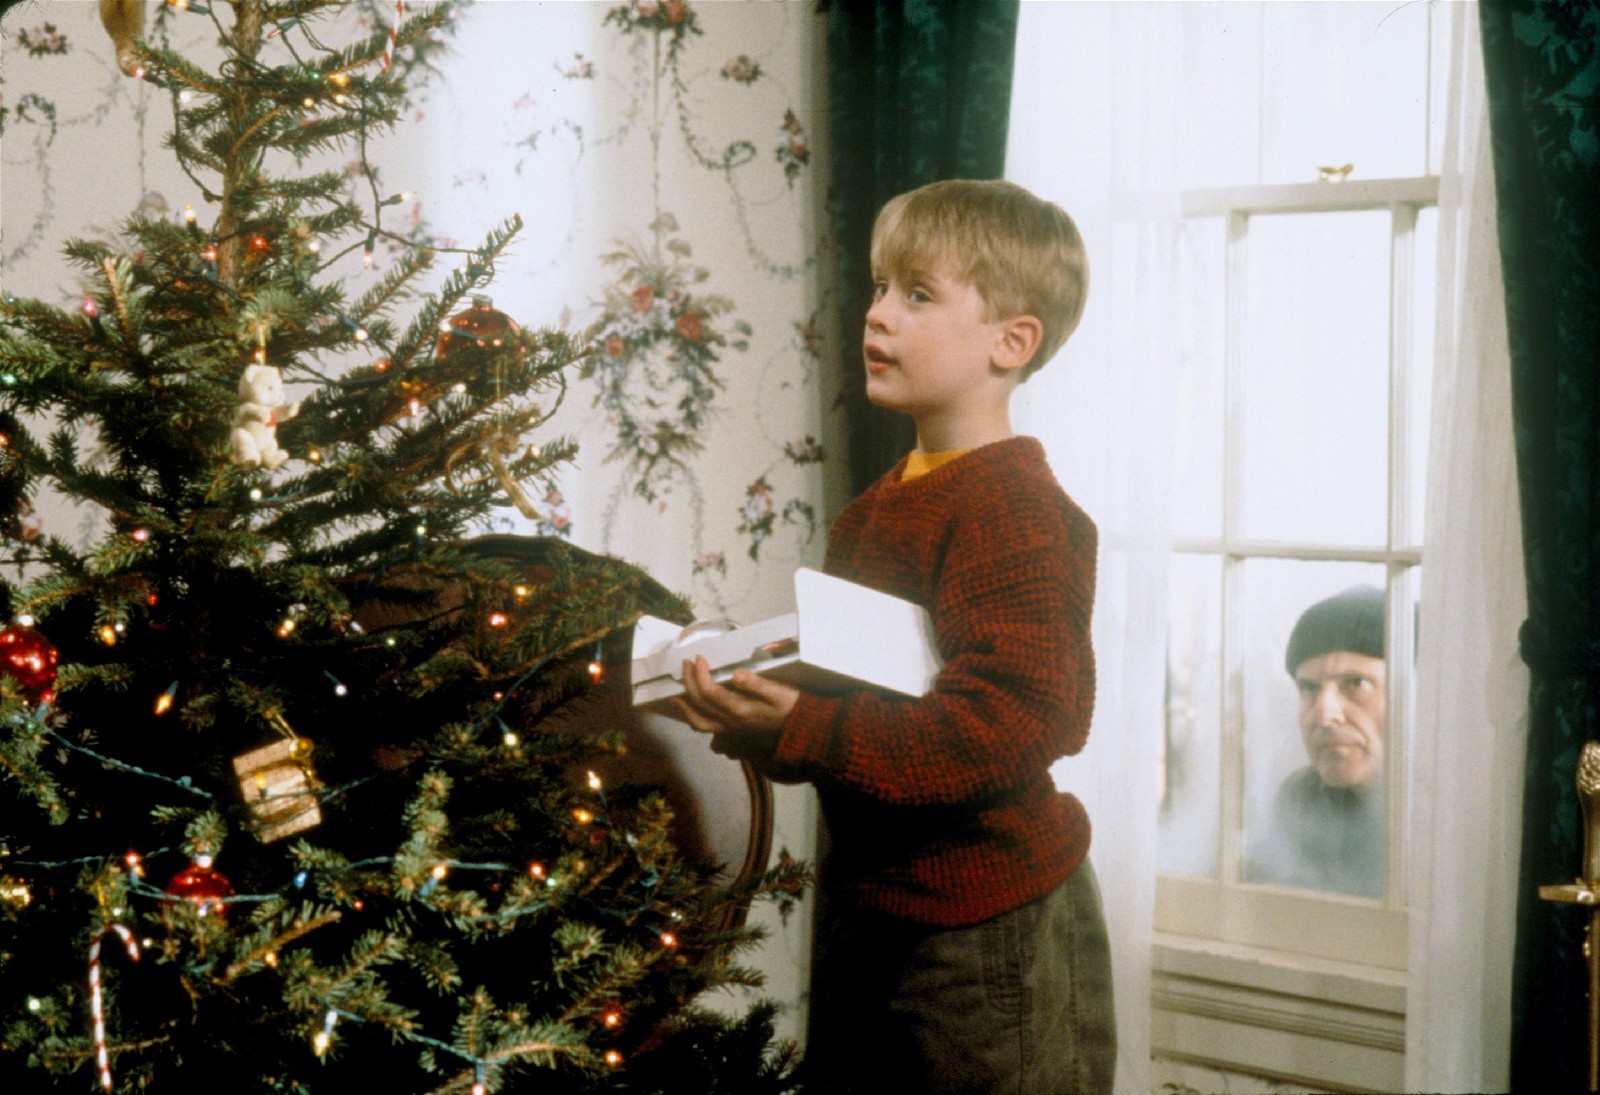 A still from one of the best Christmas movie of all time, Home Alone